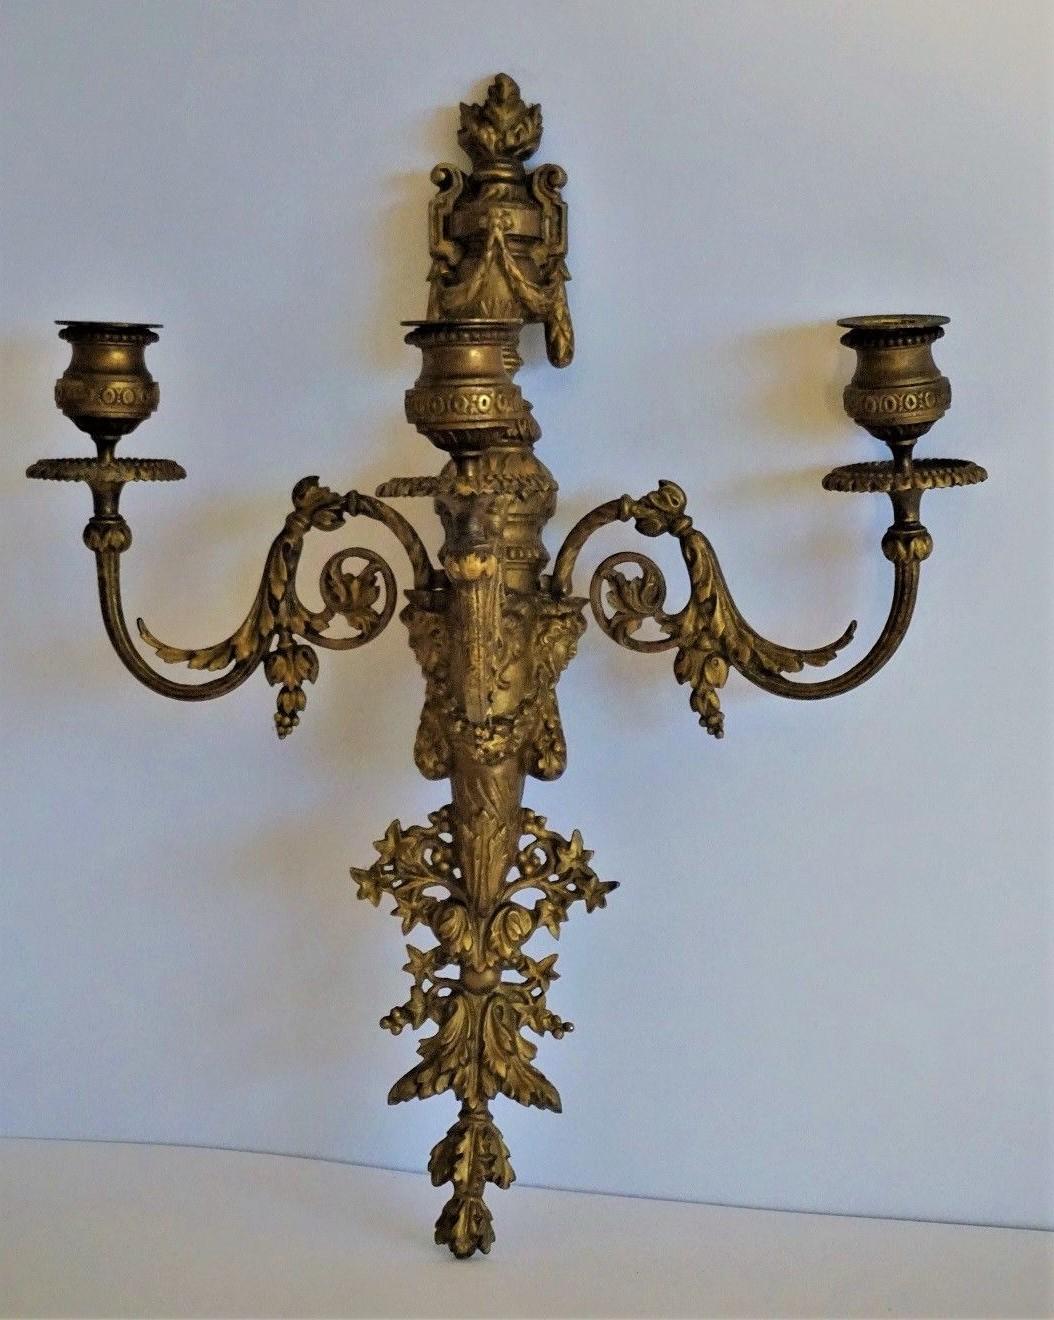 French Empire gilt bronze three-arm wall candleholder finely ornate with foliate, acorn motifs and three female faces, circa 1850-1870.
This wall candelabra can easily be converted to electric. In fine condition, wonderful aged